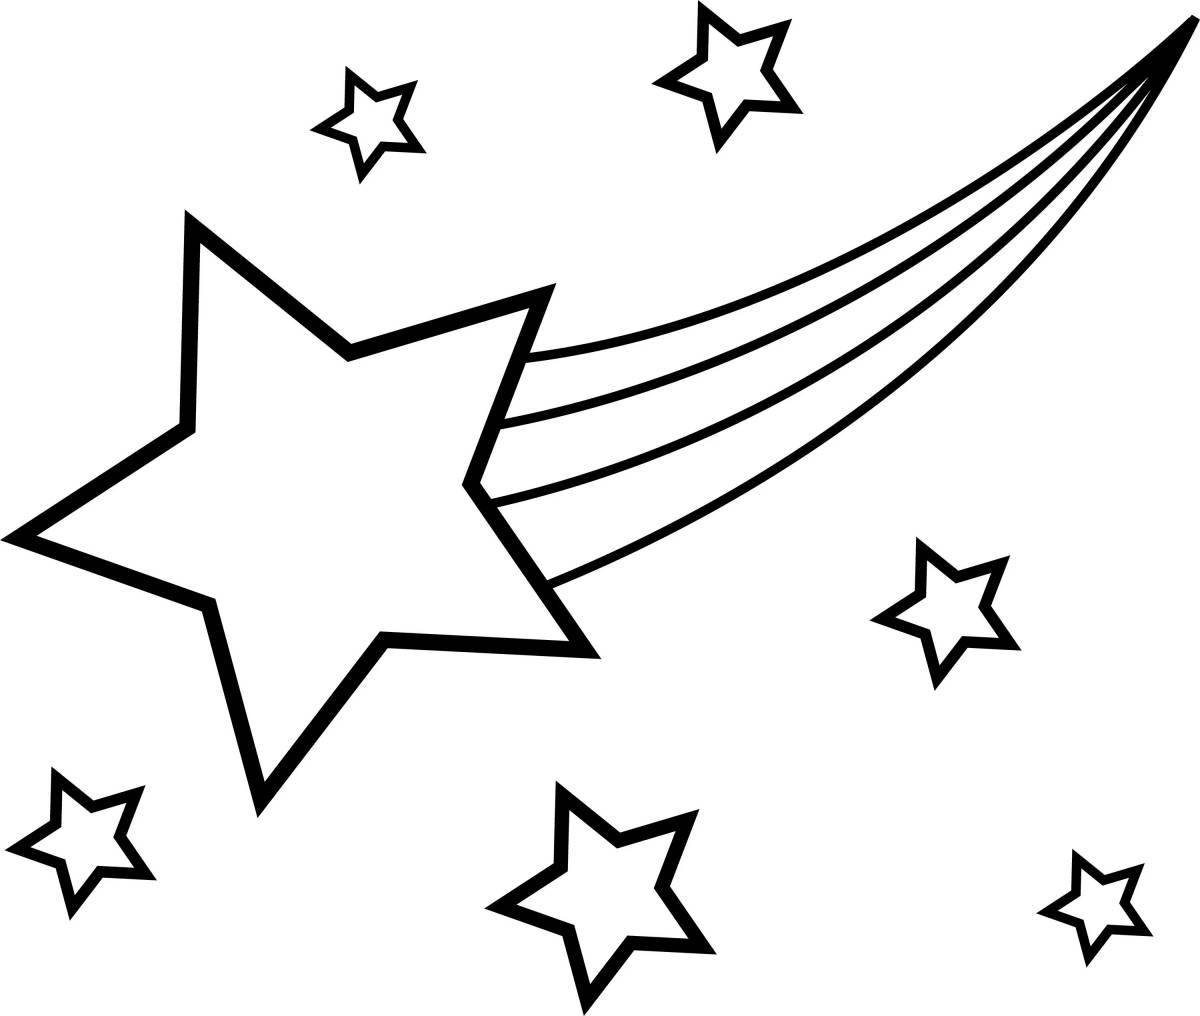 Dazzling starry sky coloring book for kids